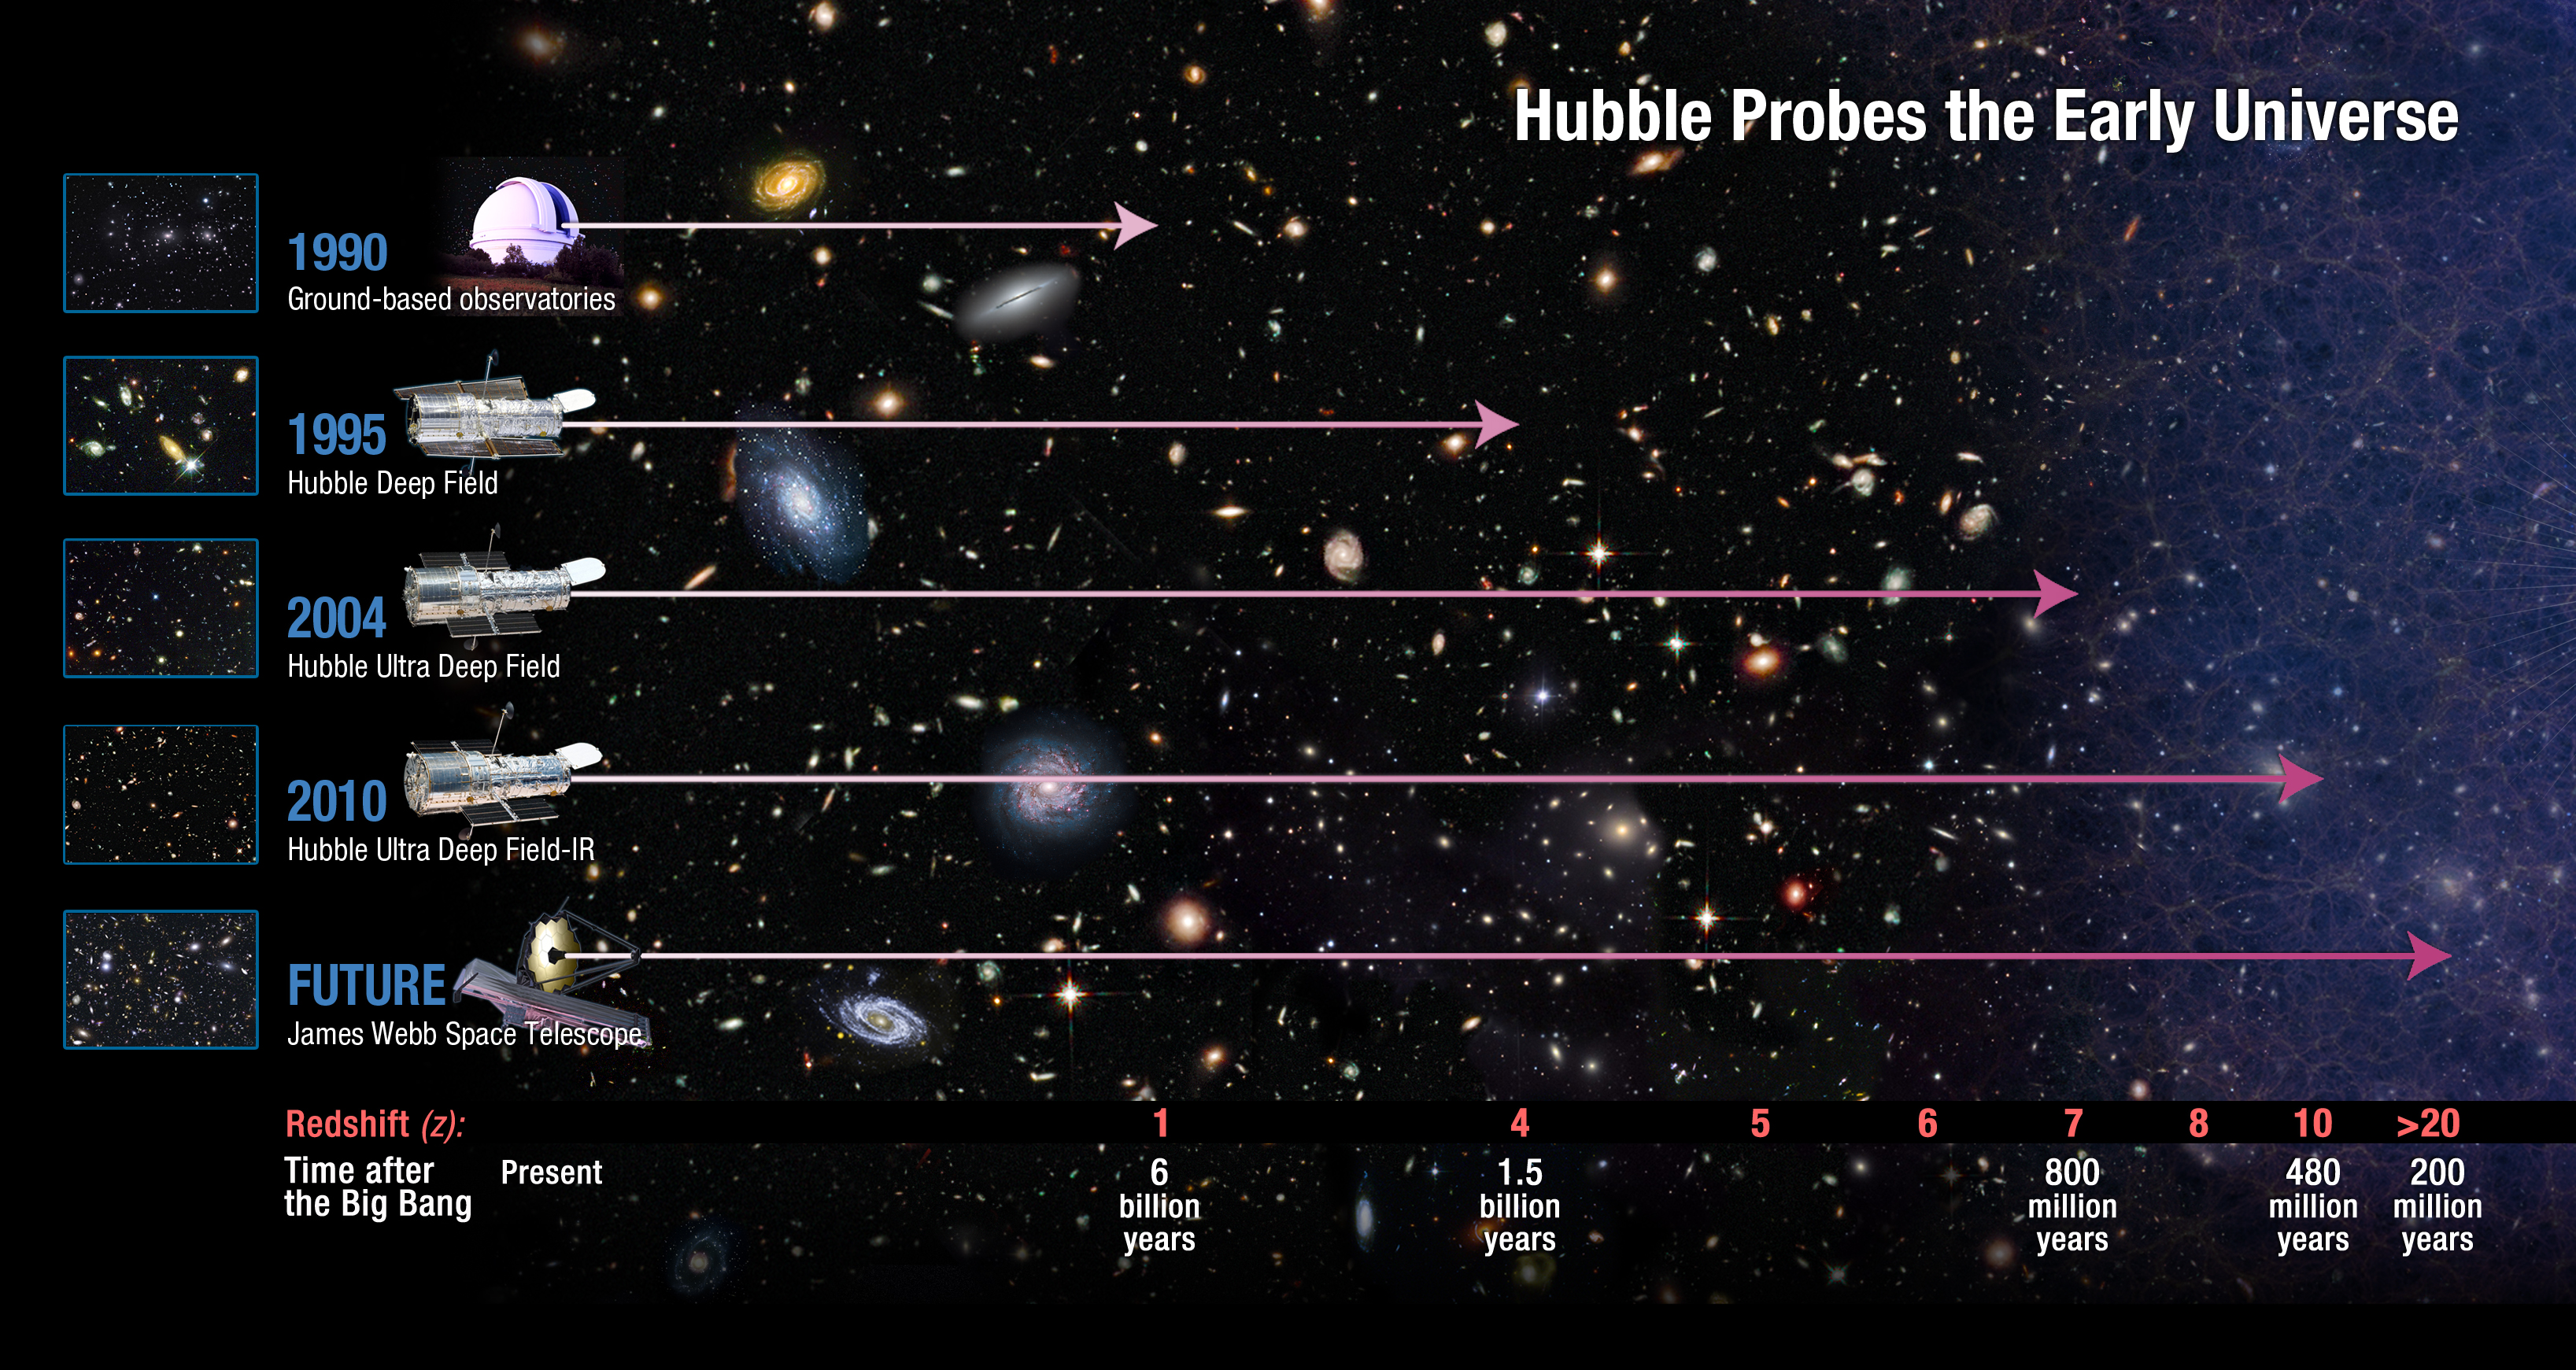 NASA Release date: Jan 26, 2011 How far does Hubble see? This diagram shows how Hubble has revolutionised the study of the distant, early Universe. Before Hubble was launched, ground-based telescopes were able to observe up to a redshift of around 1, about half way back through cosmic history. Hubble’s latest instrument, Wide Field Camera 3 has identified a candidate galaxy at a redshift of 10 — around 96 per cent of the way back to the Big Bang. The forthcoming NASA/ESA/CSA James Webb Space Telescope will see further still. Credit: NASA, ESA To read more go to: http://www.nasa.gov/mission_pages/hubble/science/farthest-galaxy.html NASA Goddard Space Flight Center enables NASA’s mission through four scientific endeavors: Earth Science, Heliophysics, Solar System Exploration, and Astrophysics. Goddard plays a leading role in NASA’s accomplishments by contributing compelling scientific knowledge to advance the Agency’s mission. Follow us on Twitter Join us on Facebook